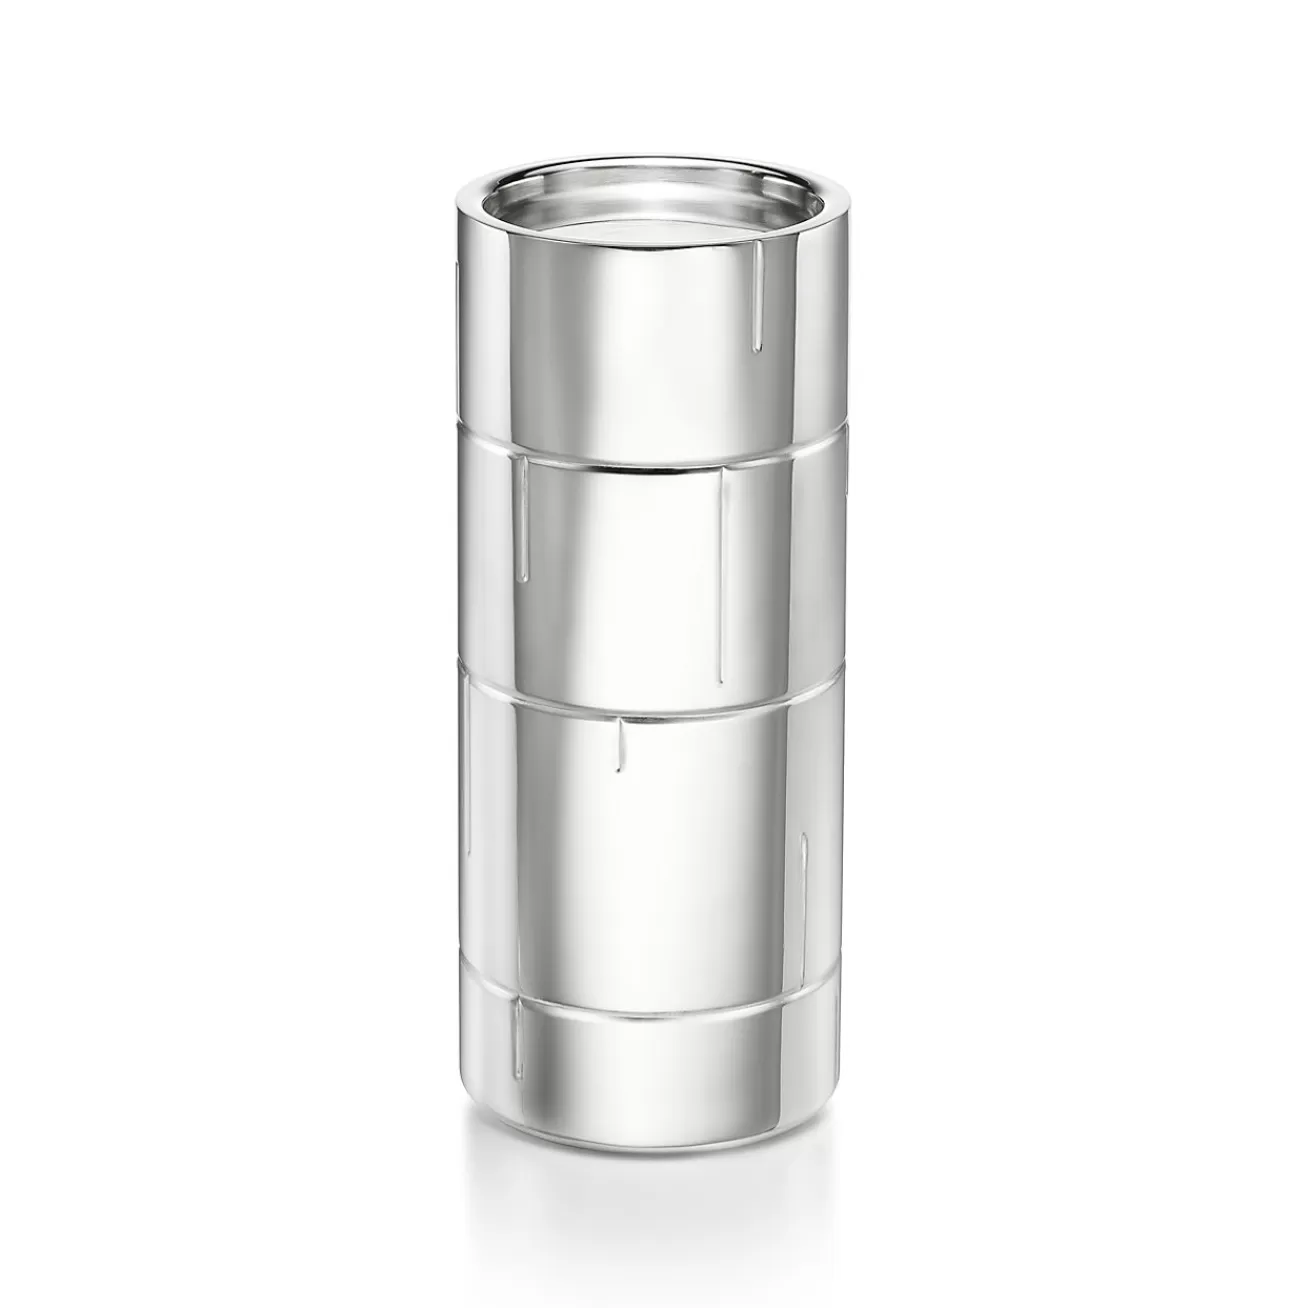 Tiffany & Co. Modern Bamboo Pillar Candleholder in Sterling Silver | ^ The Home | Housewarming Gifts